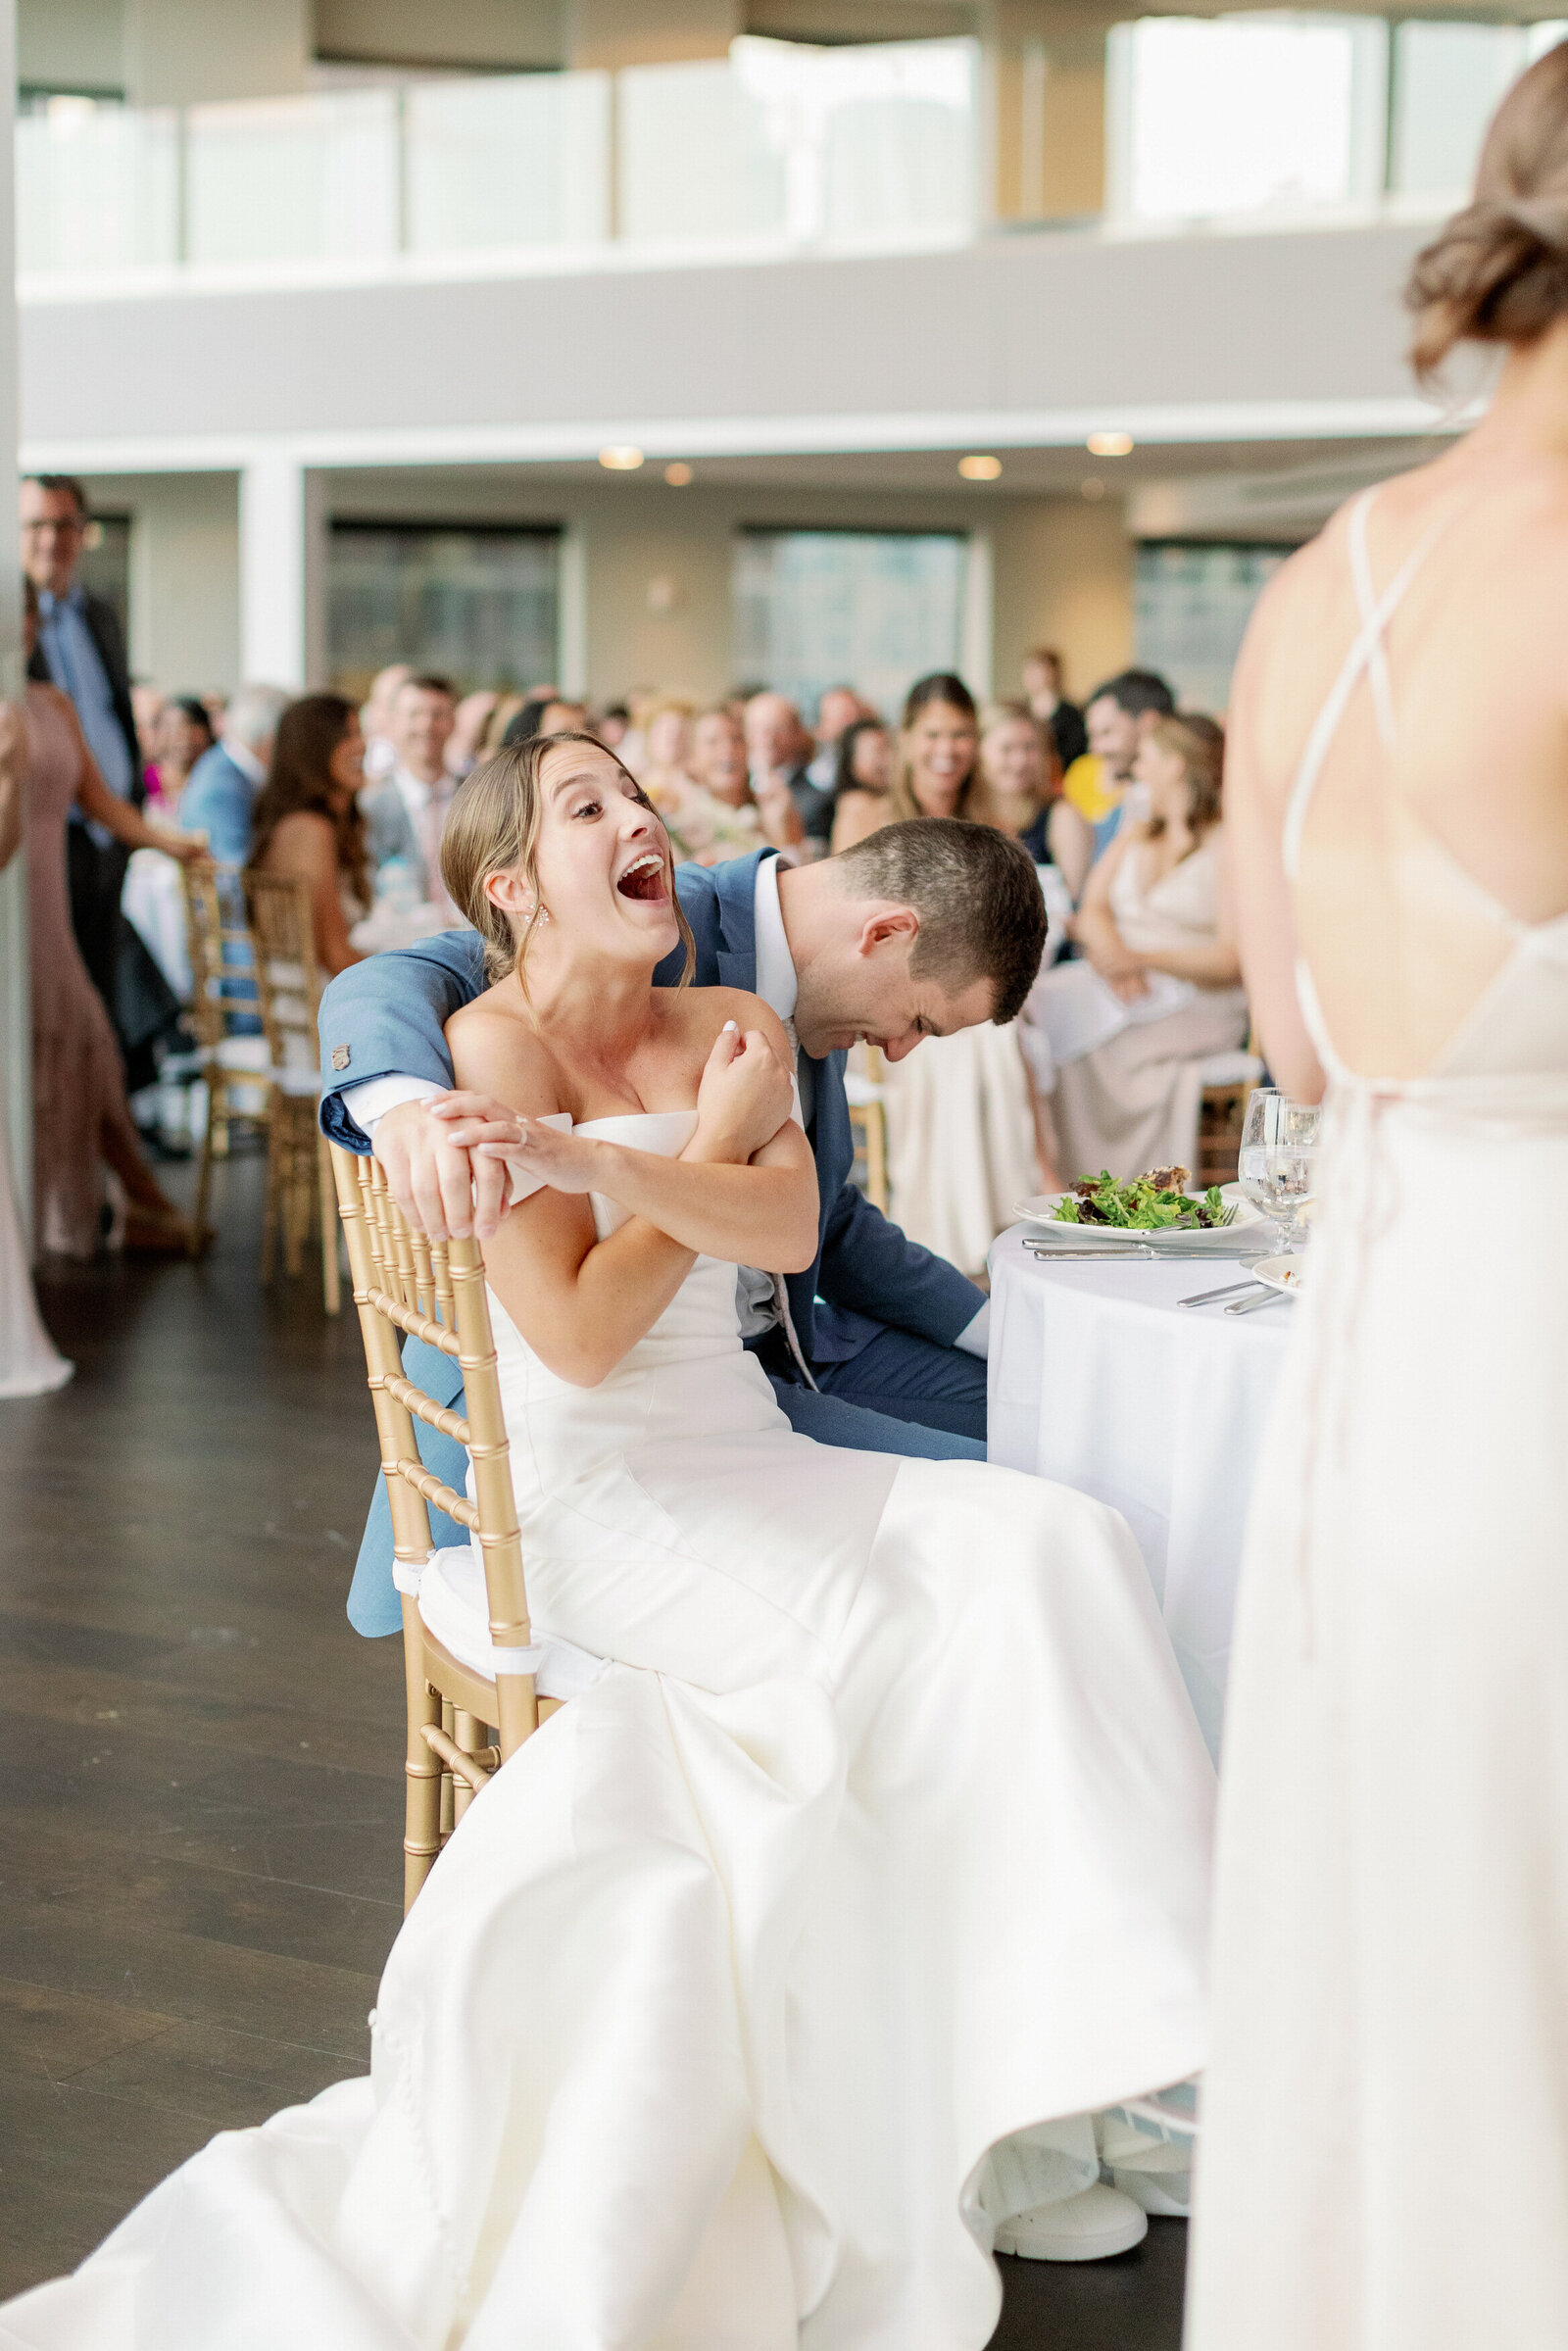 Bride laughing as she sits down at her wedding reception.